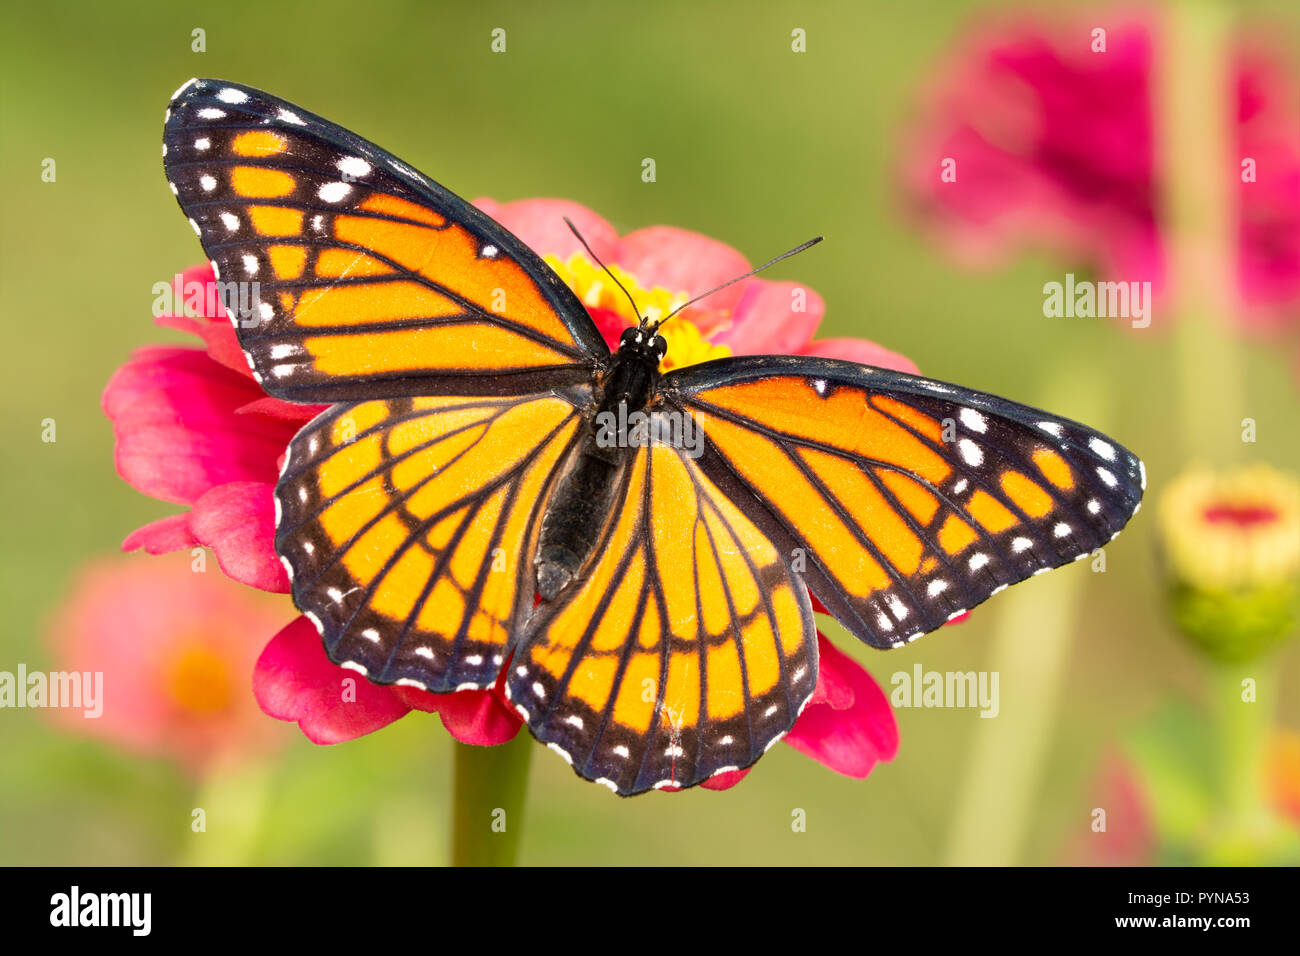 beautiful Viceroy butterfly on a hot pink Zinnia flower in a fall garden Stock Photo